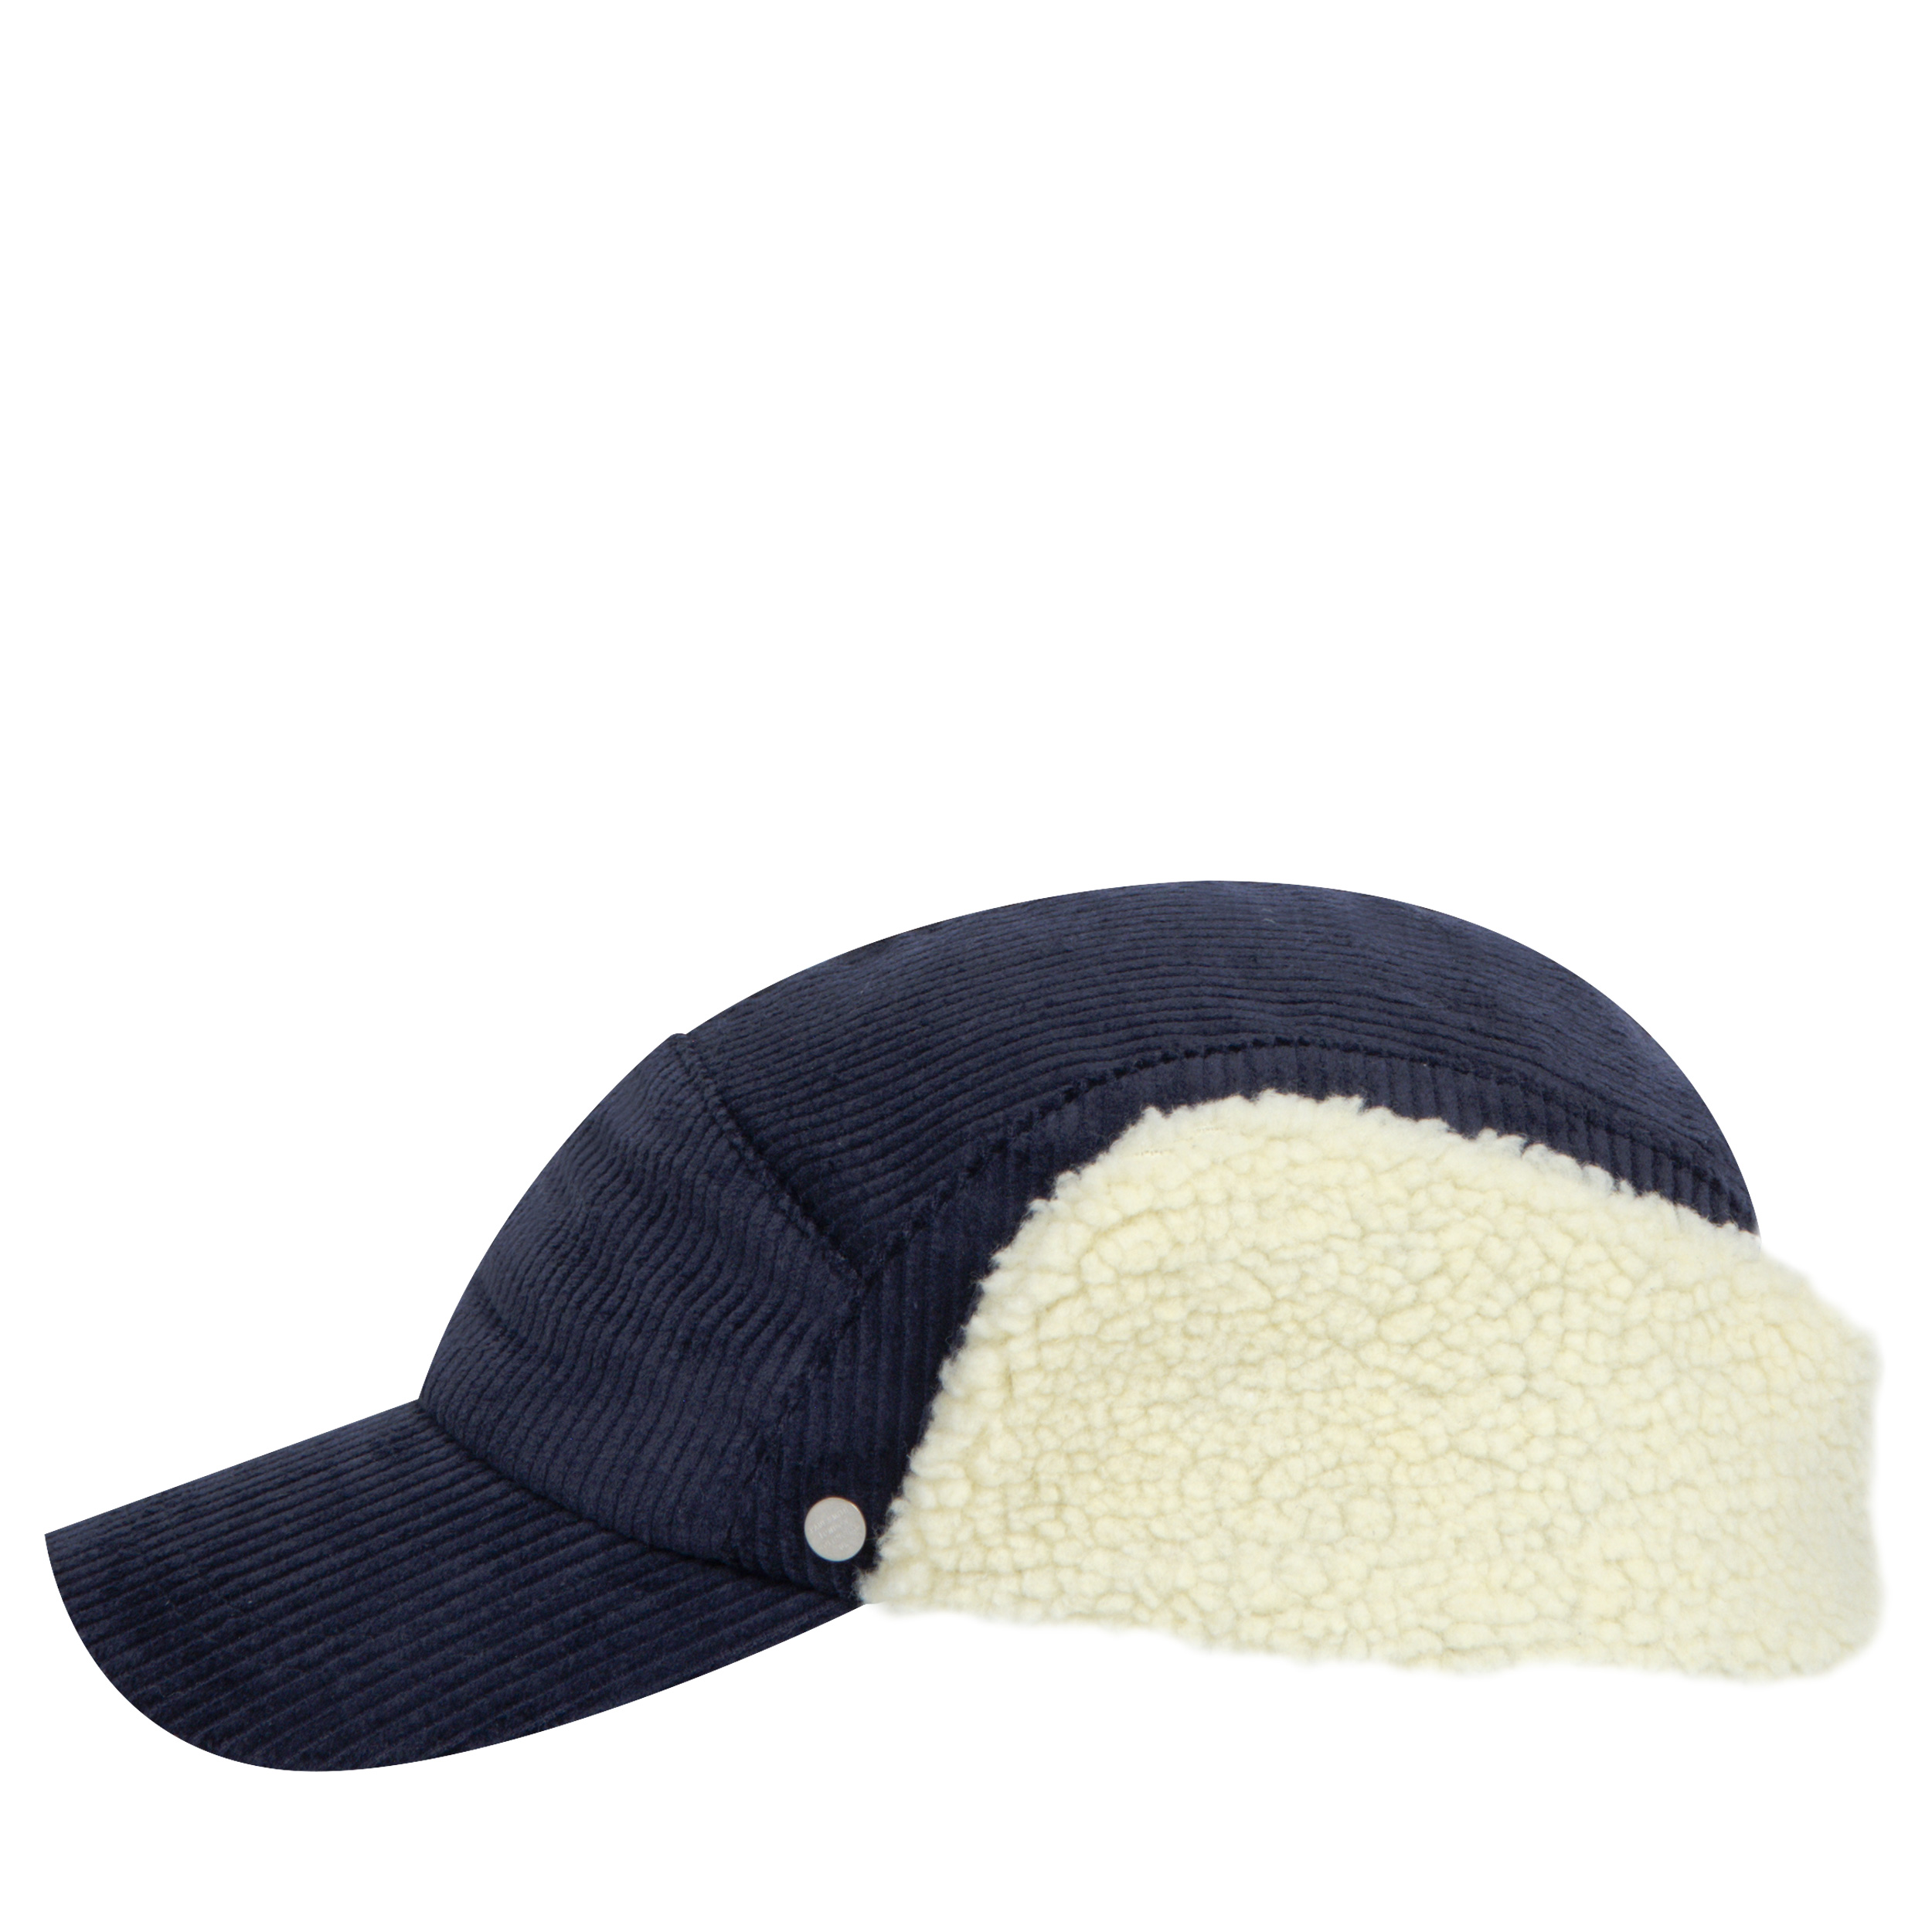 Paul Smith ’Corduroy’ Shearling Lined Cap Navy